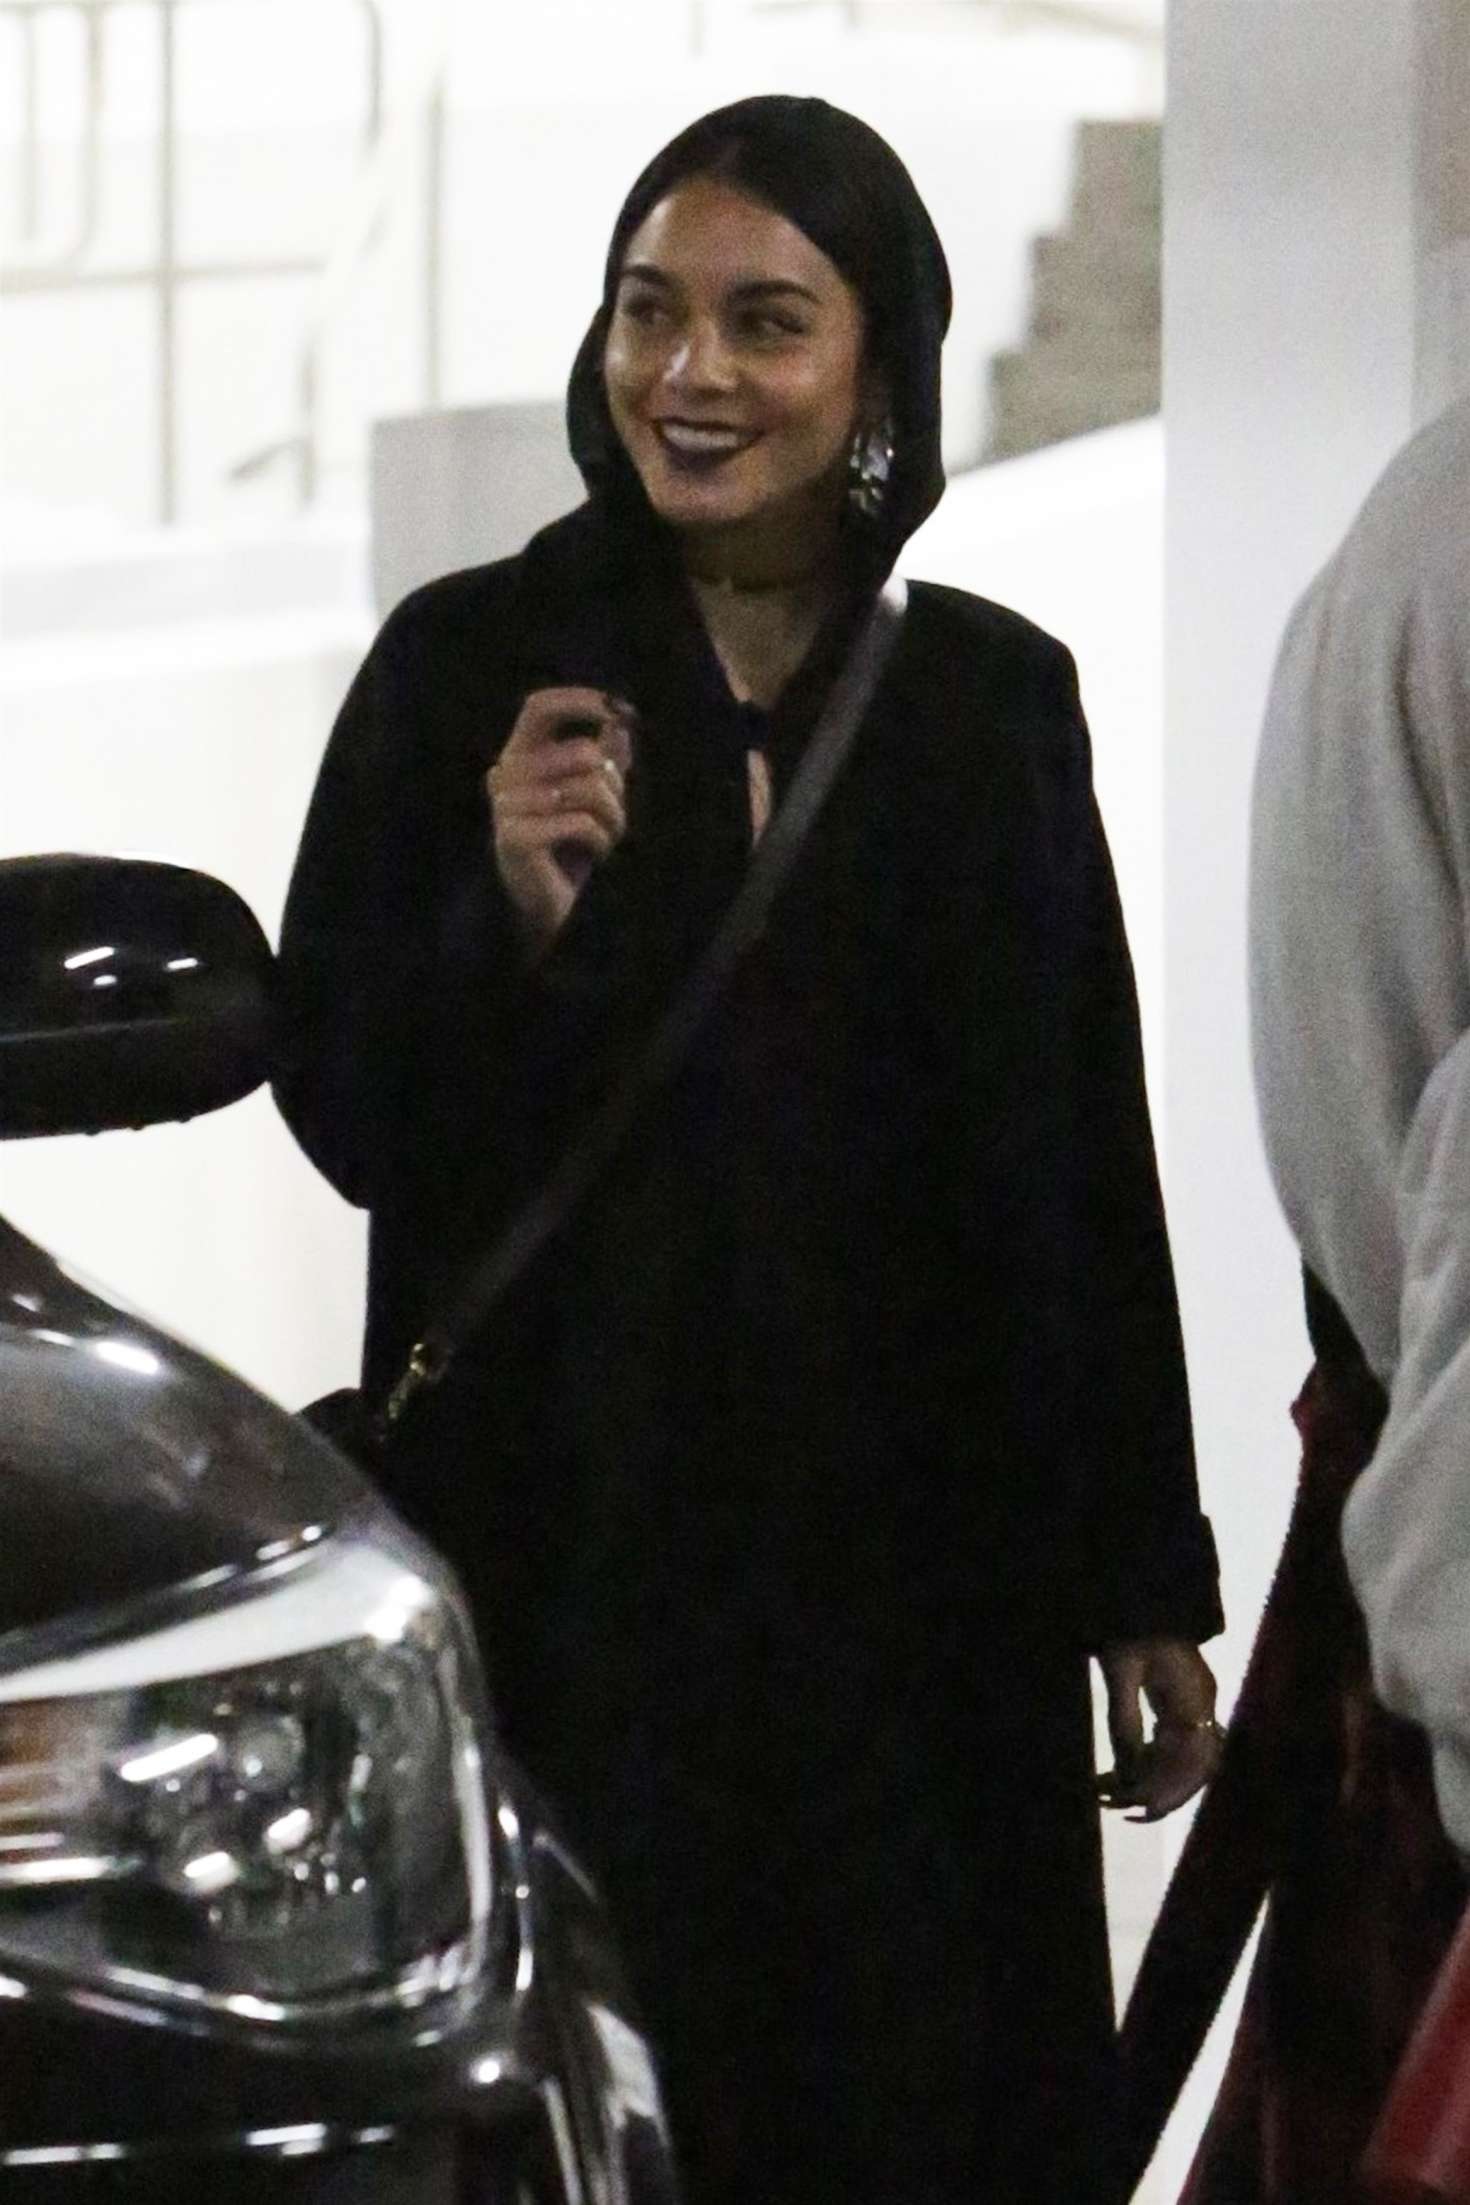 Vanessa Hudgens at the Arclight Theater in Hollywood